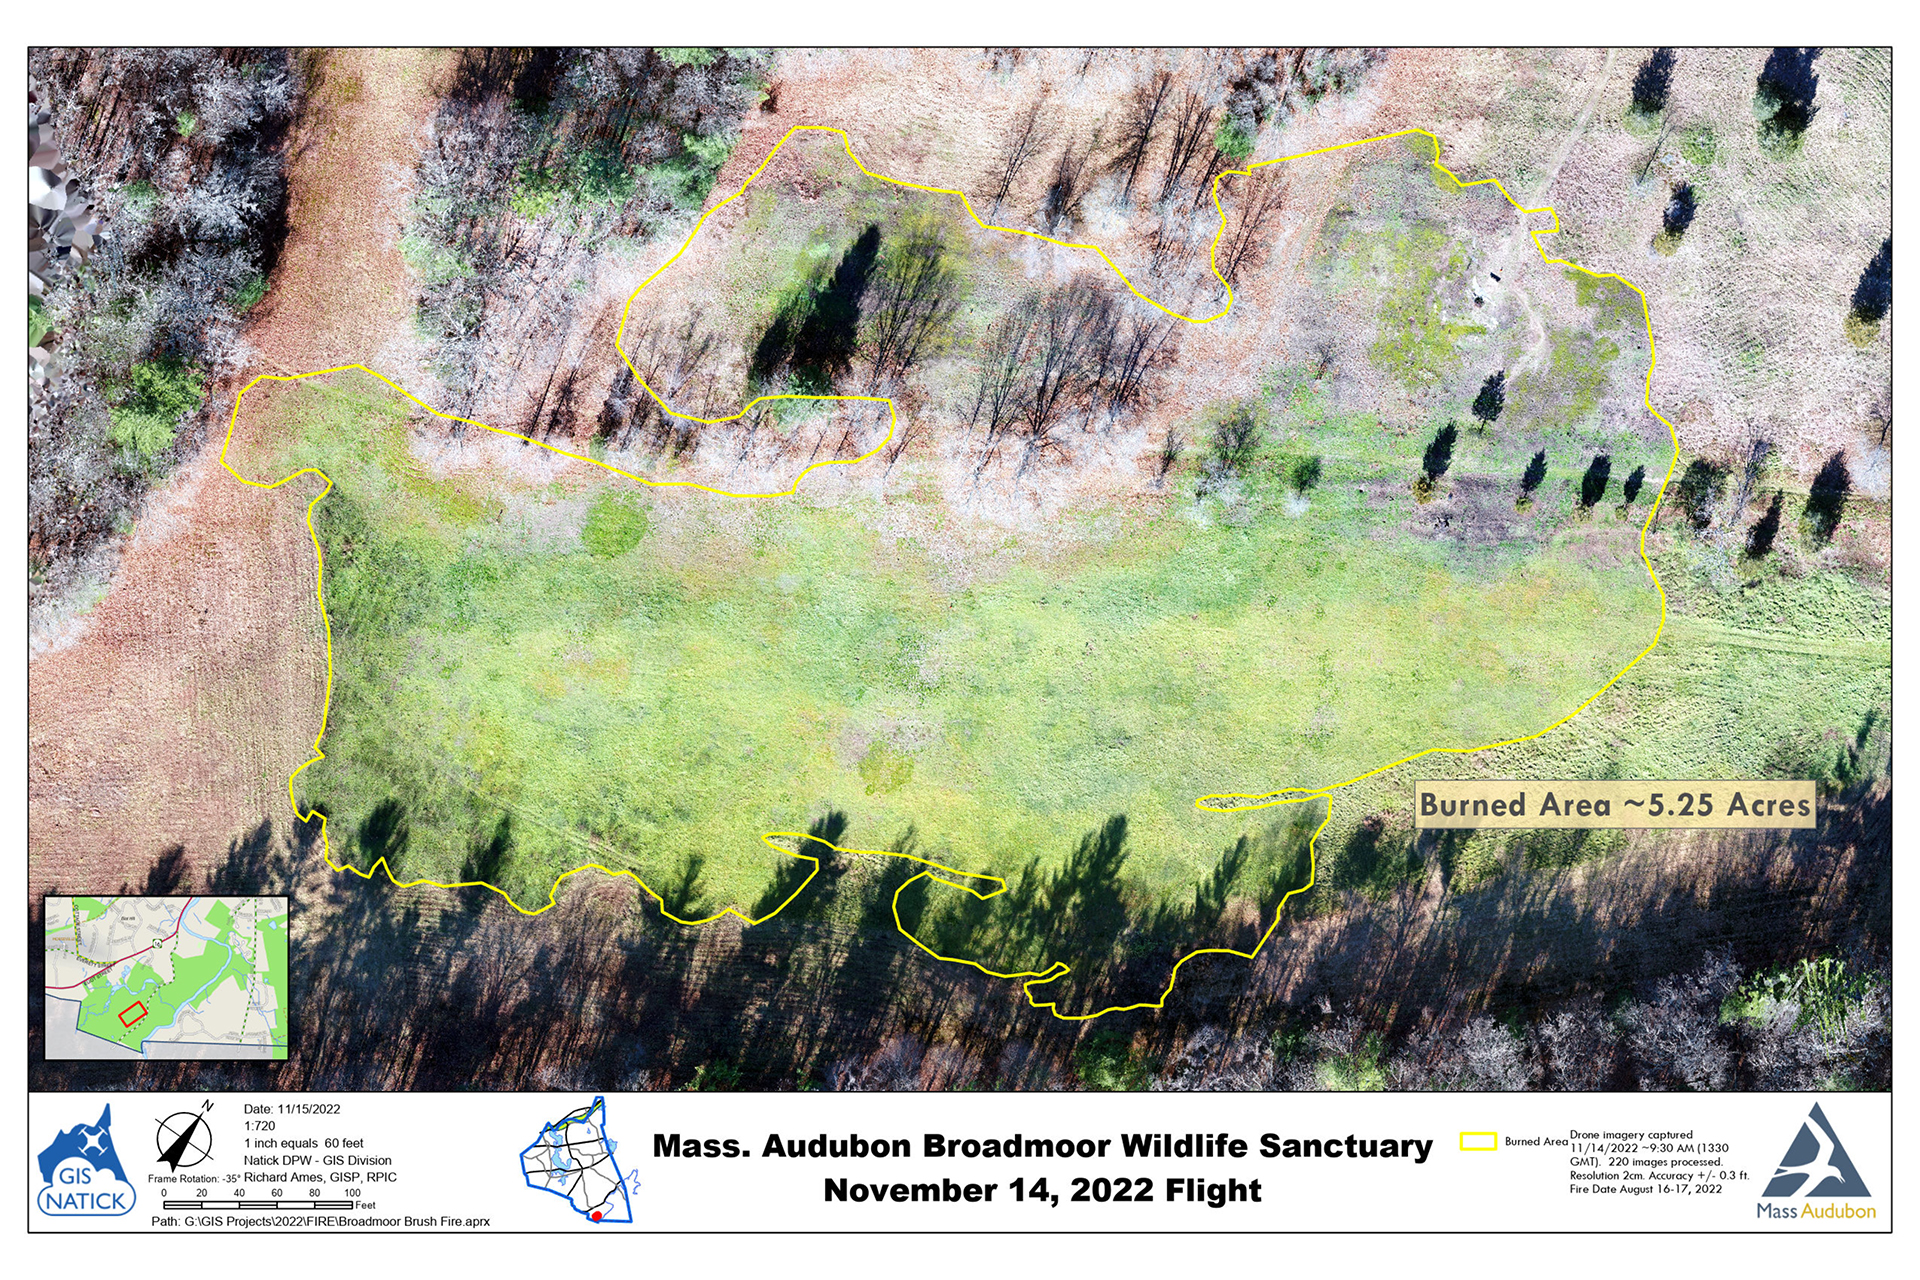 Aerial view of Broadmoor showing brush fire recovery, a pale green field surrounded by dark evergreens, as of November 14, 2022